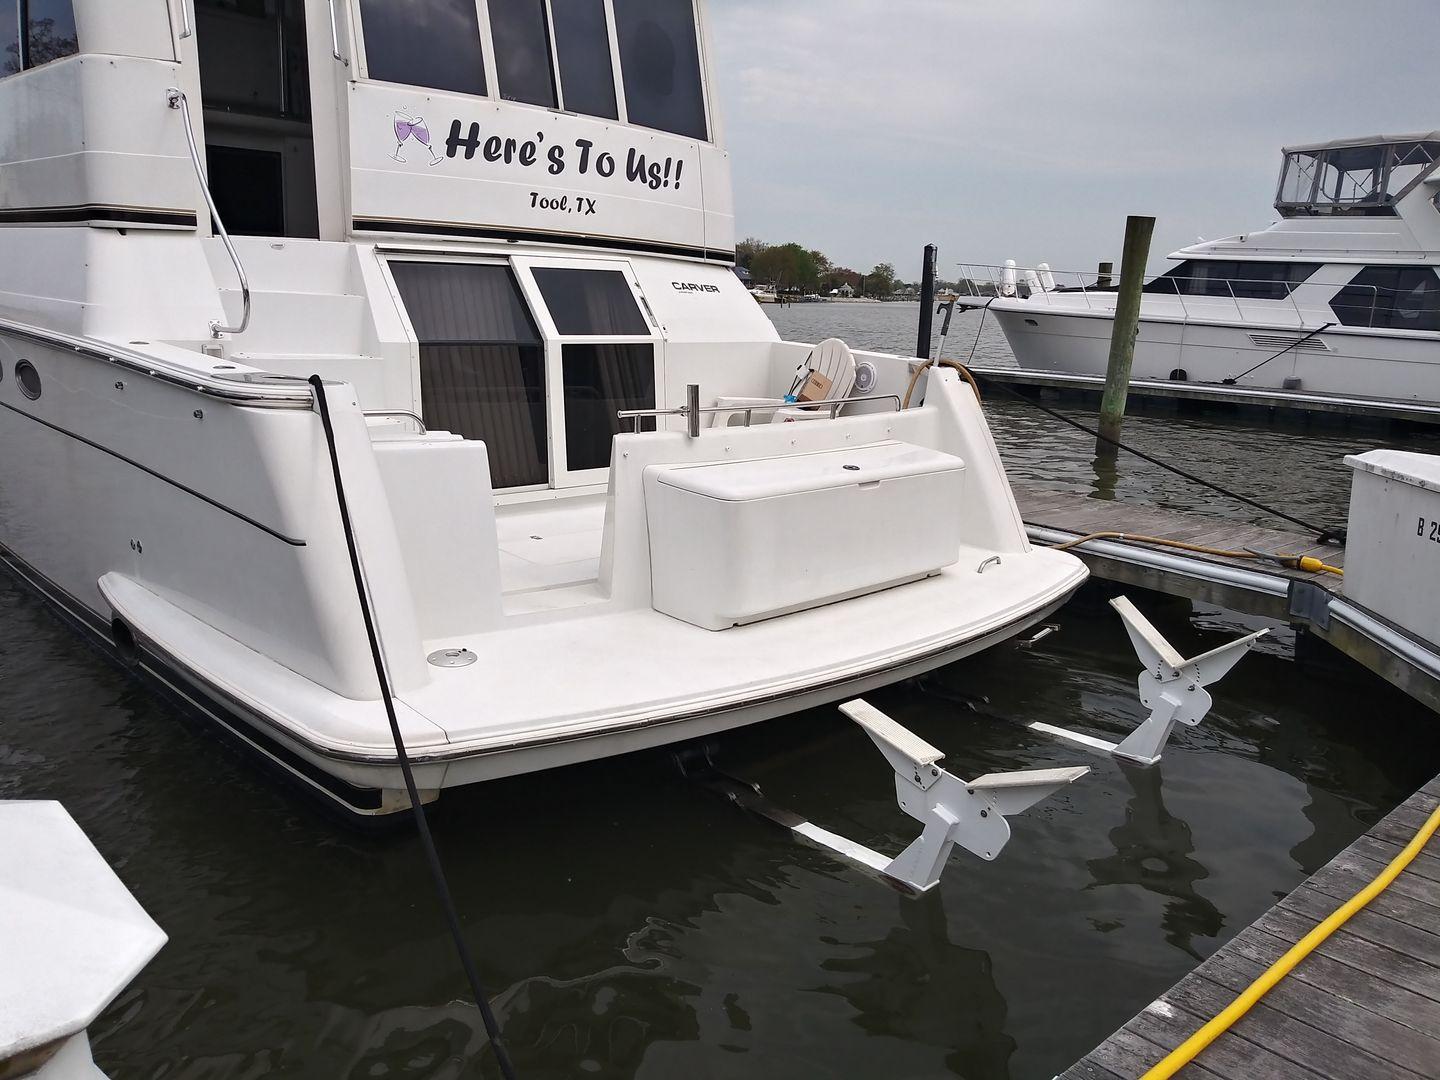 Yacht is equipped with a Freedom Lift davit system that accommodates 800 pound lift. Freedom Lift Motor replaced and refitted in 2021. 